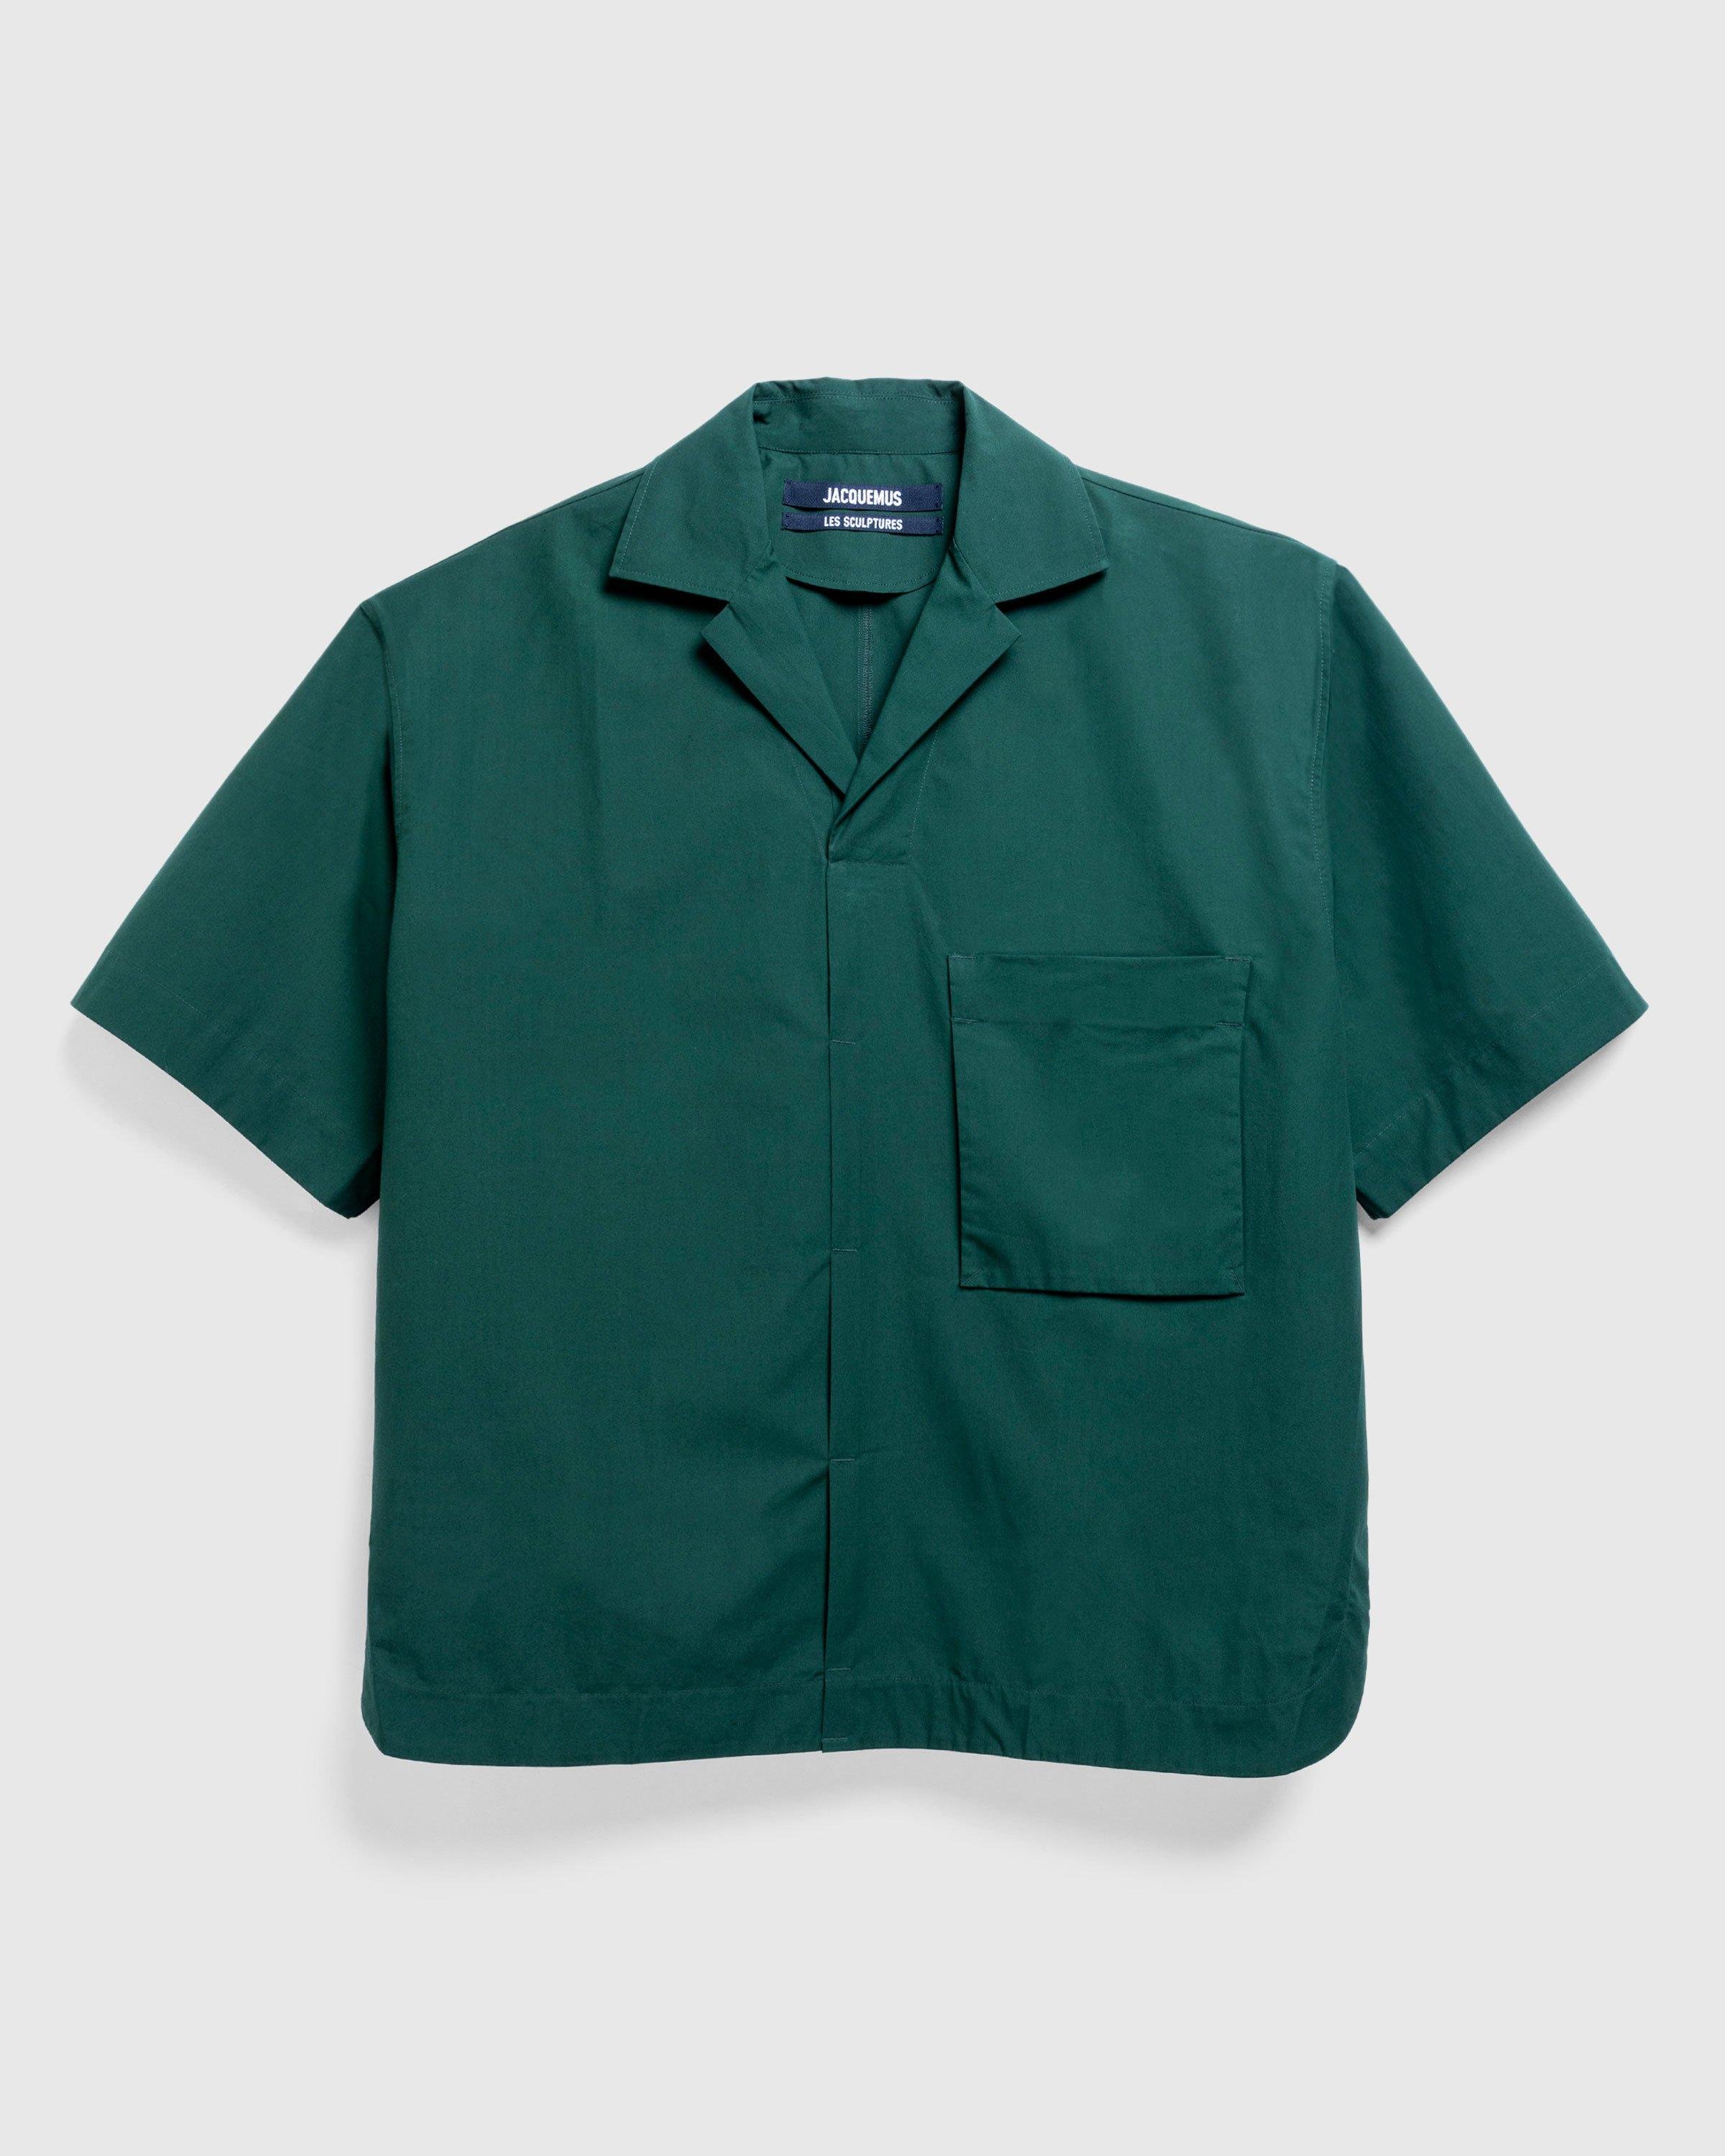 JACQUEMUSLe Haut Polo Dark Green by HIGHSNOBIETY